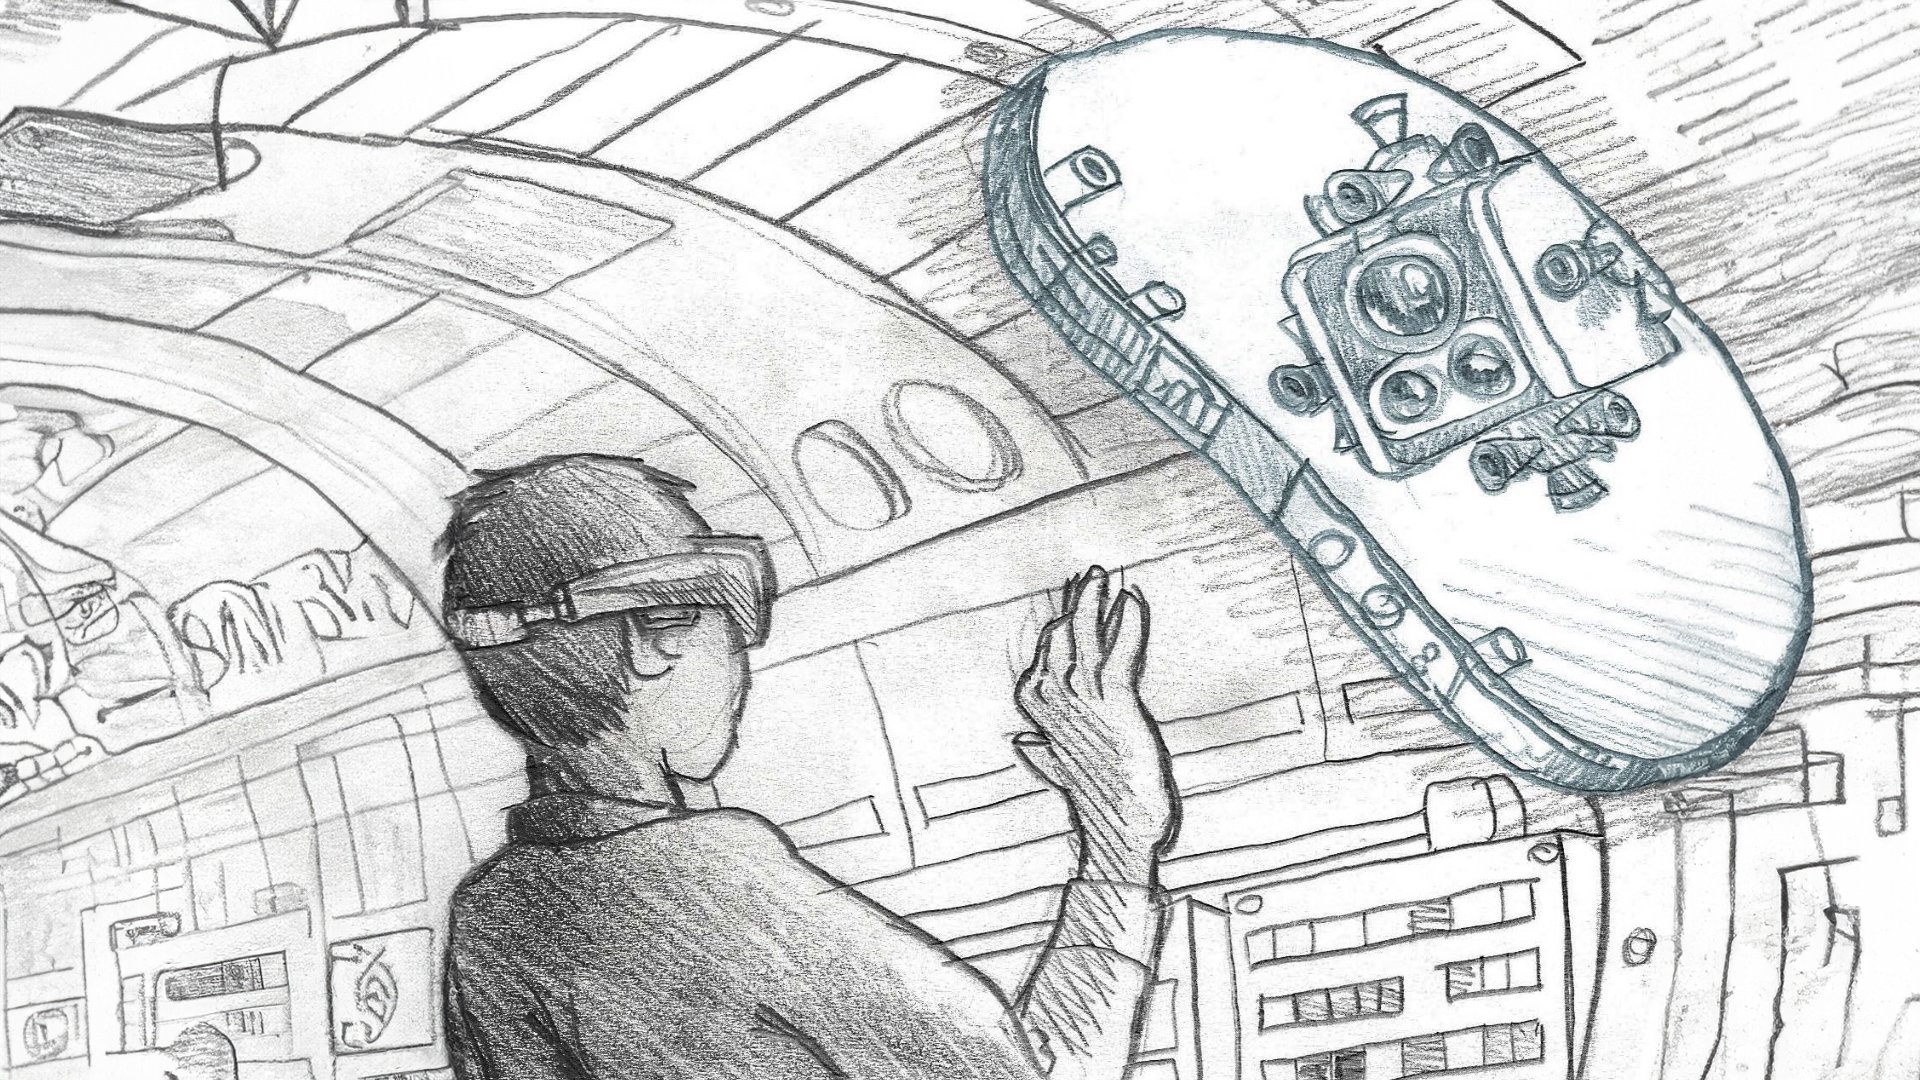    A concept illustration that captures the inception of virtual reality tools designed for the astronauts of tomorrow.   